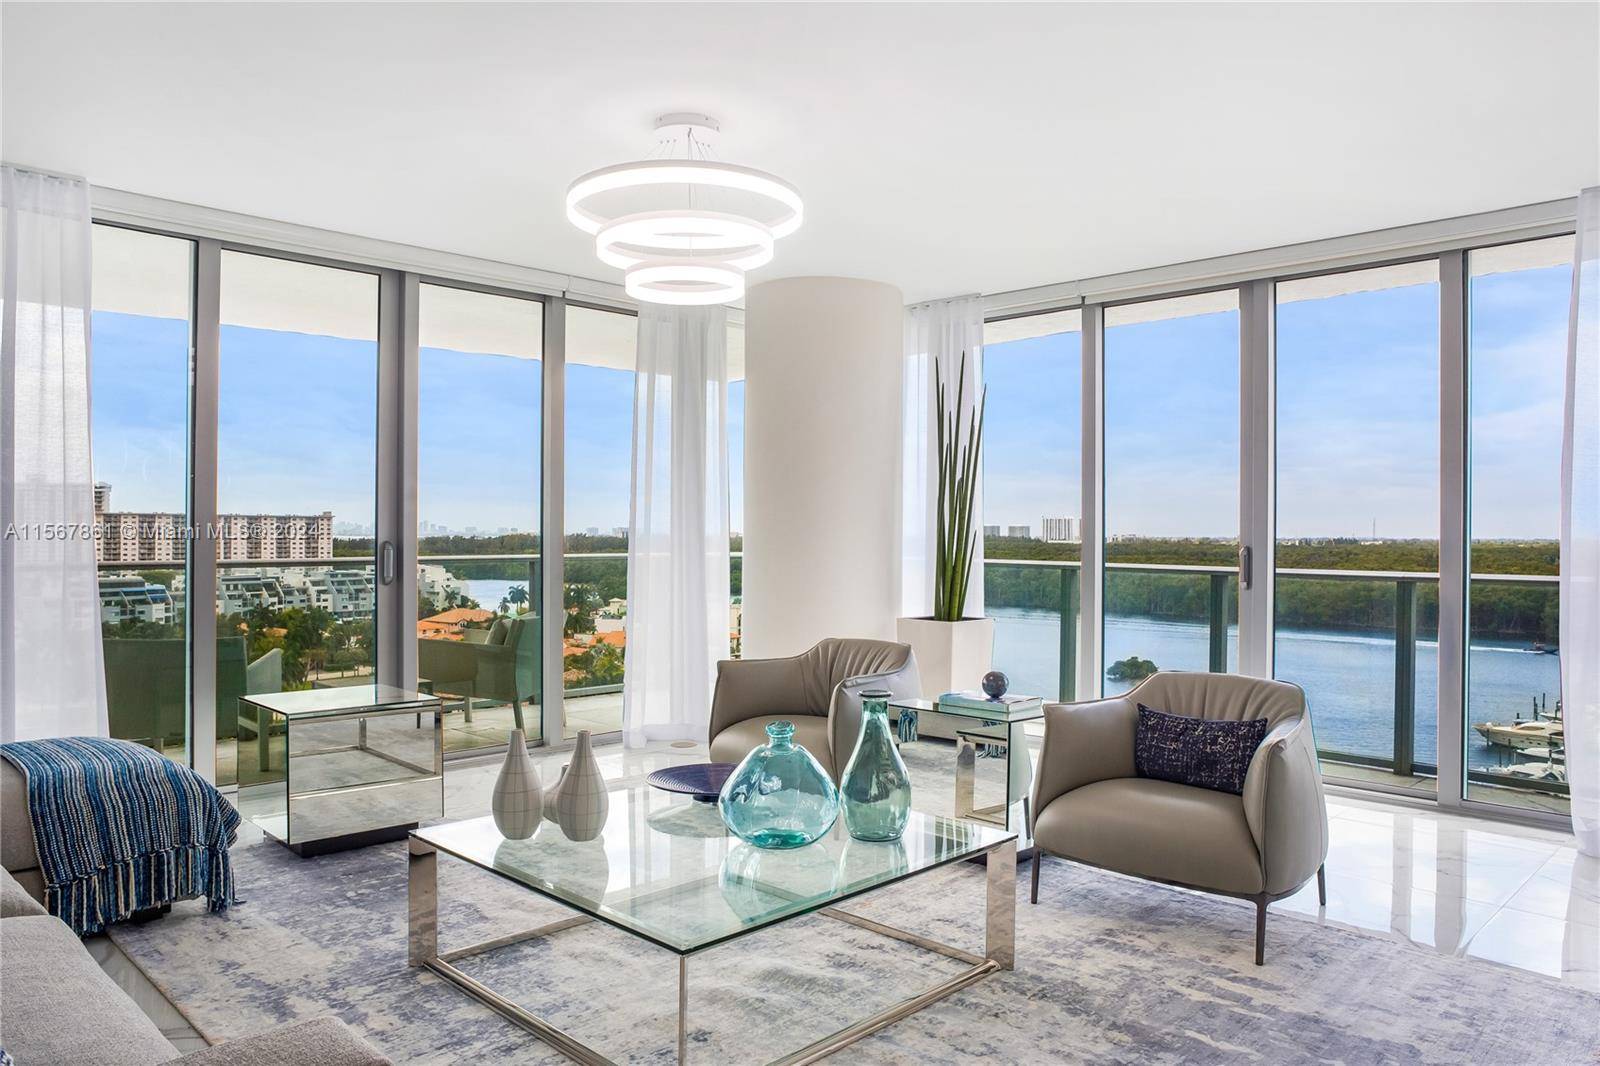 Welcome to Parque Towers, a furnished 3 bed apartment in Sunny Isles Beach, FL.